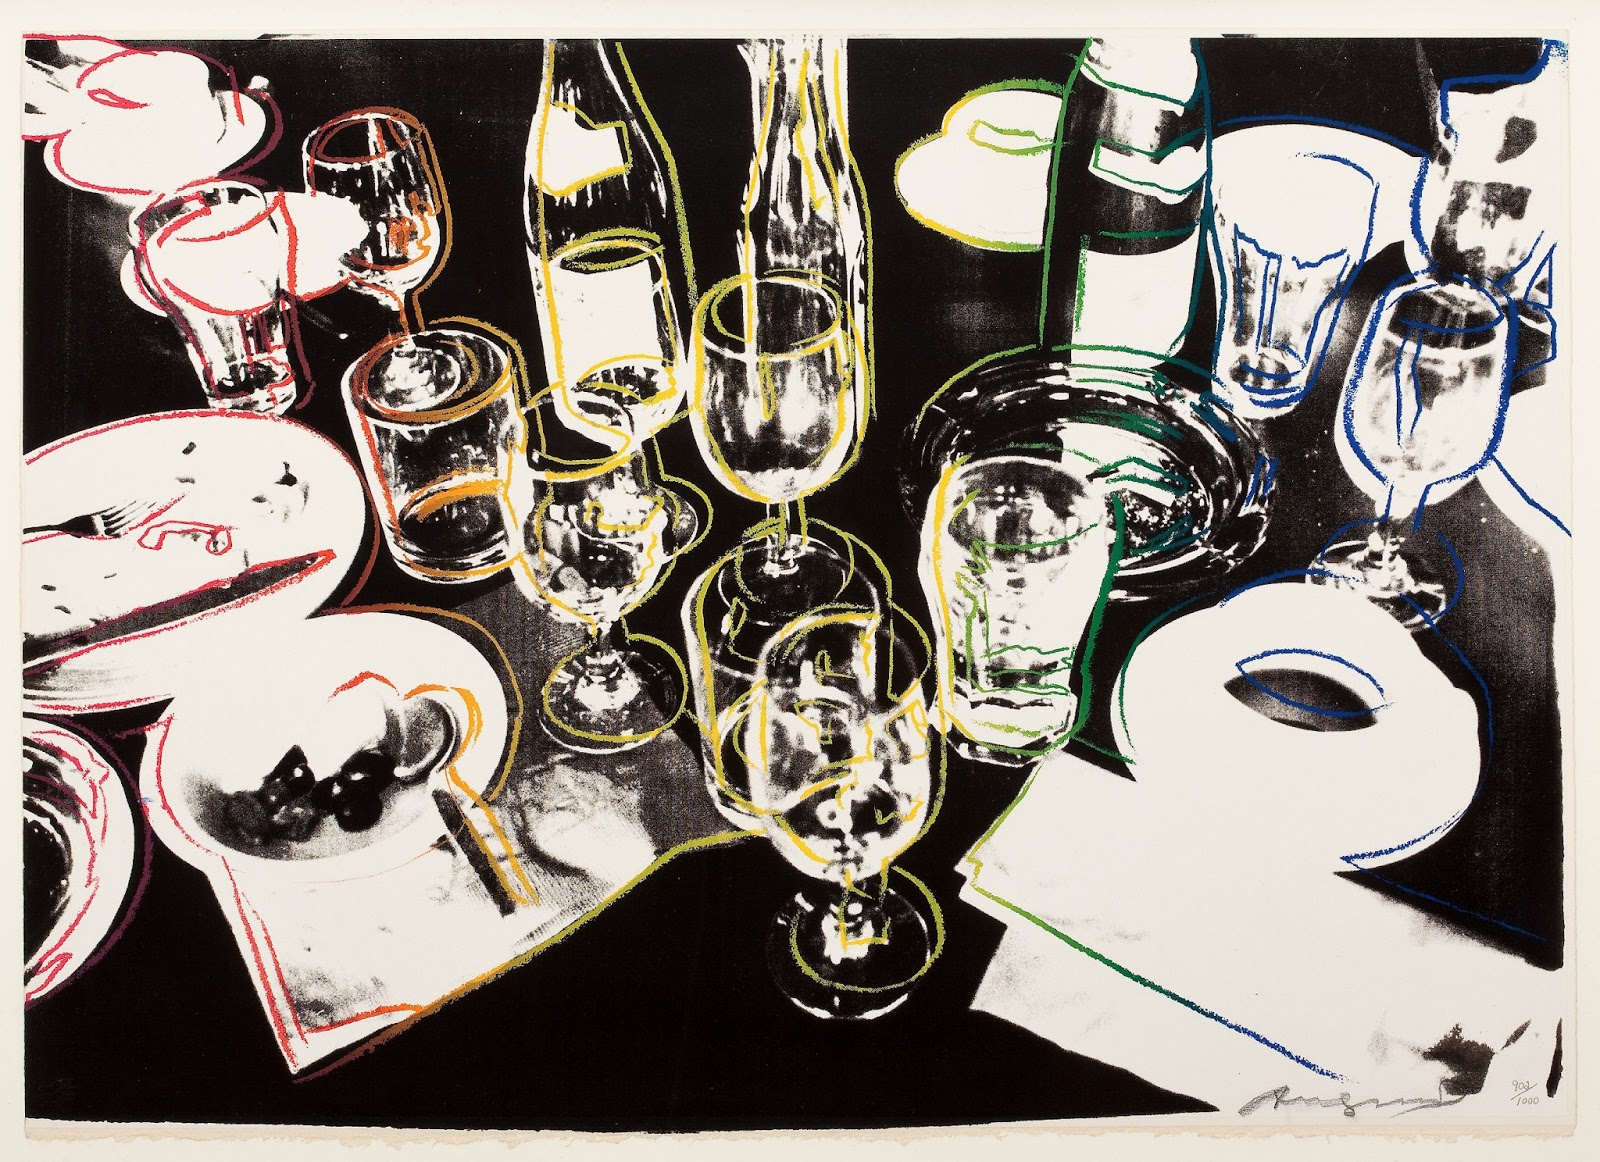 After the Party by Andy Warhol - 1979 - 15 x 38 cm collection privée